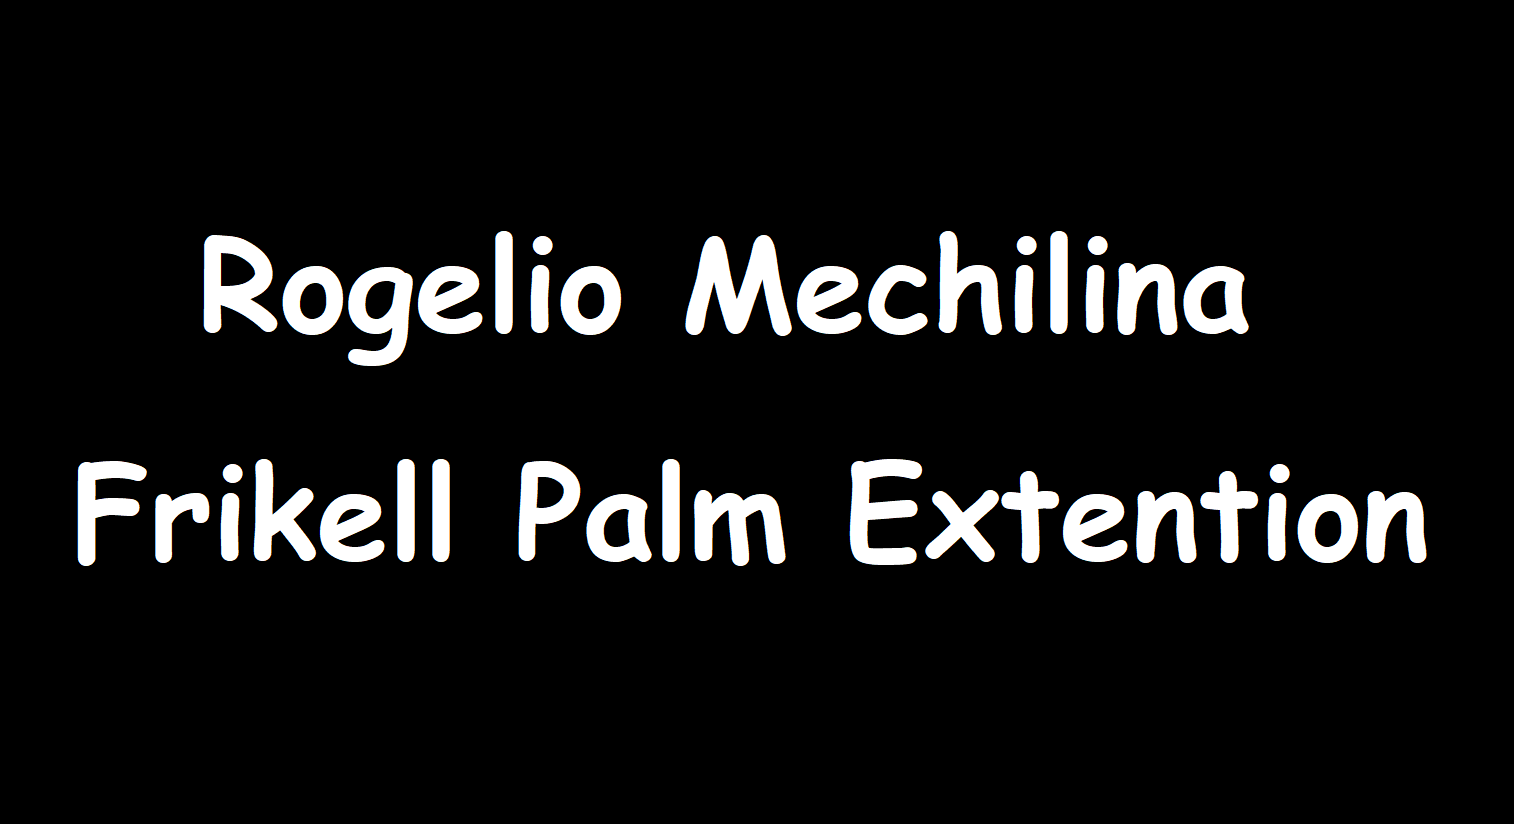 Rogelio Mechilina - Frikell Palm Extension